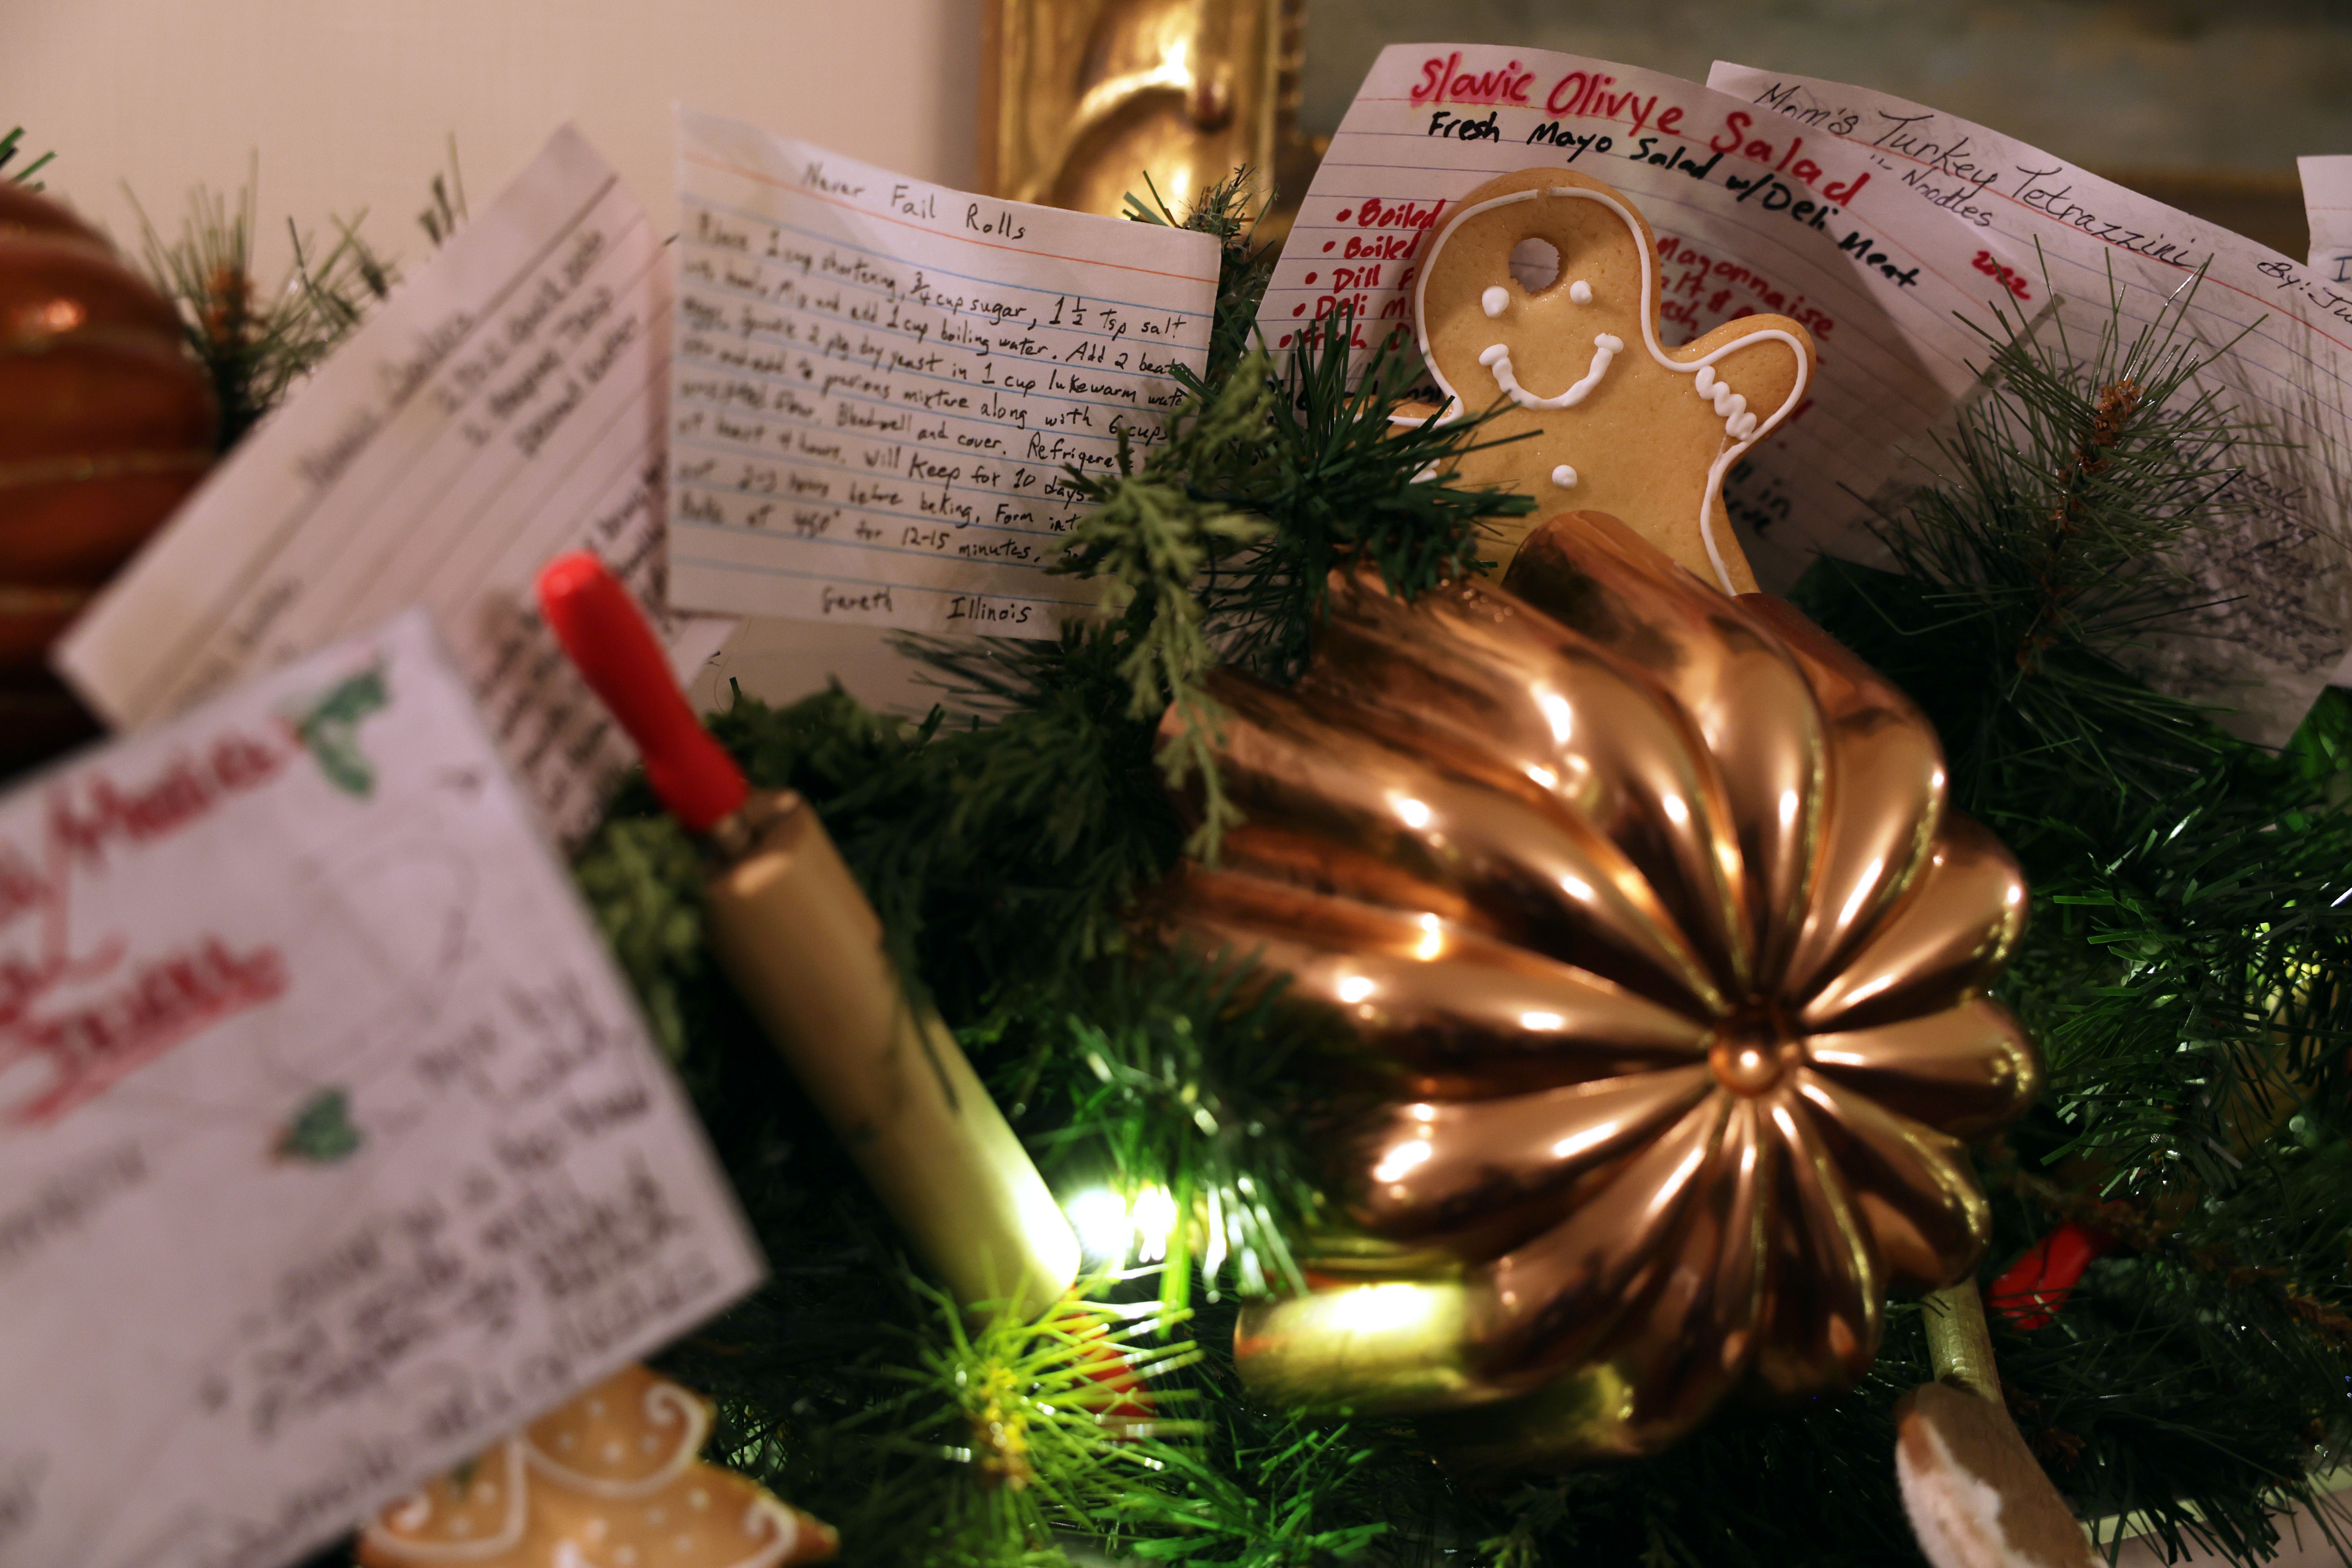 Volunteers shared family recipes as part of the White House Christmas decor.